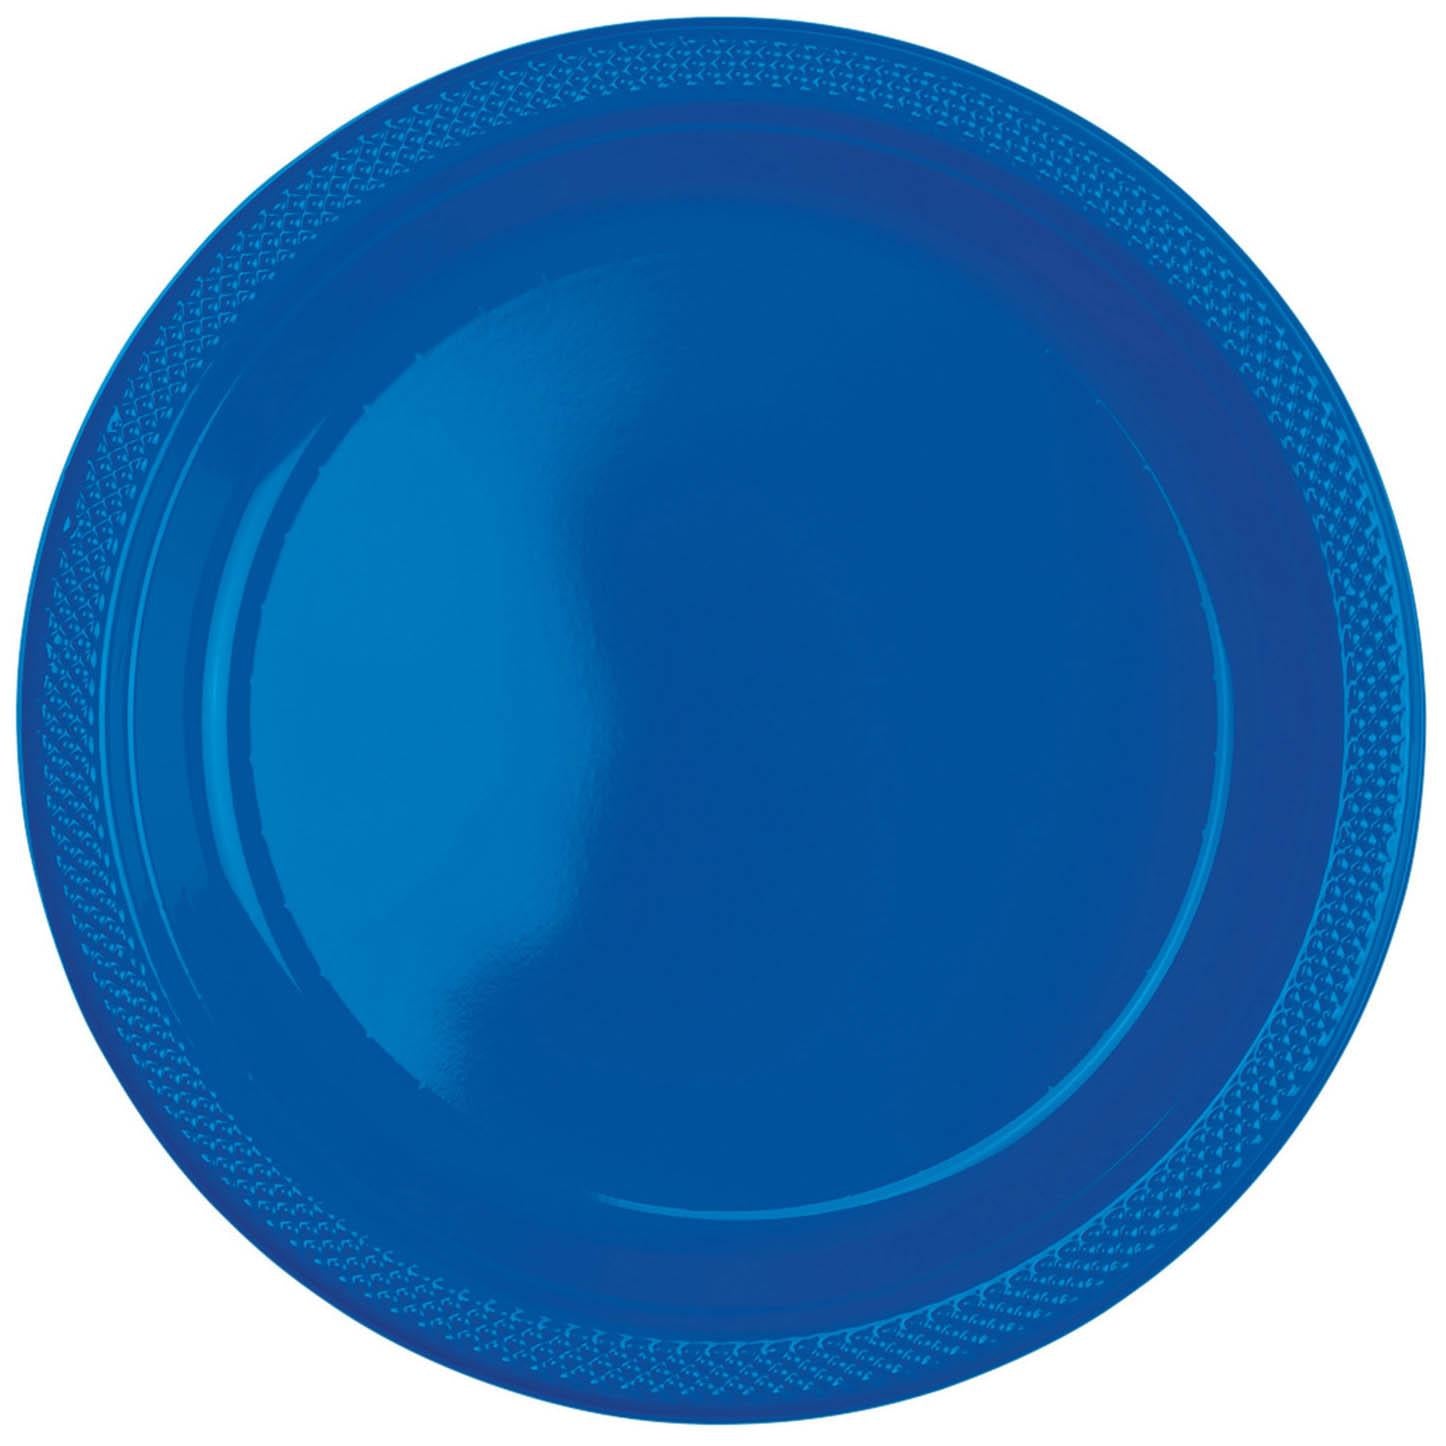 Bright Royal Blue Plates 10in, 20pcs Solid Tableware - Party Centre